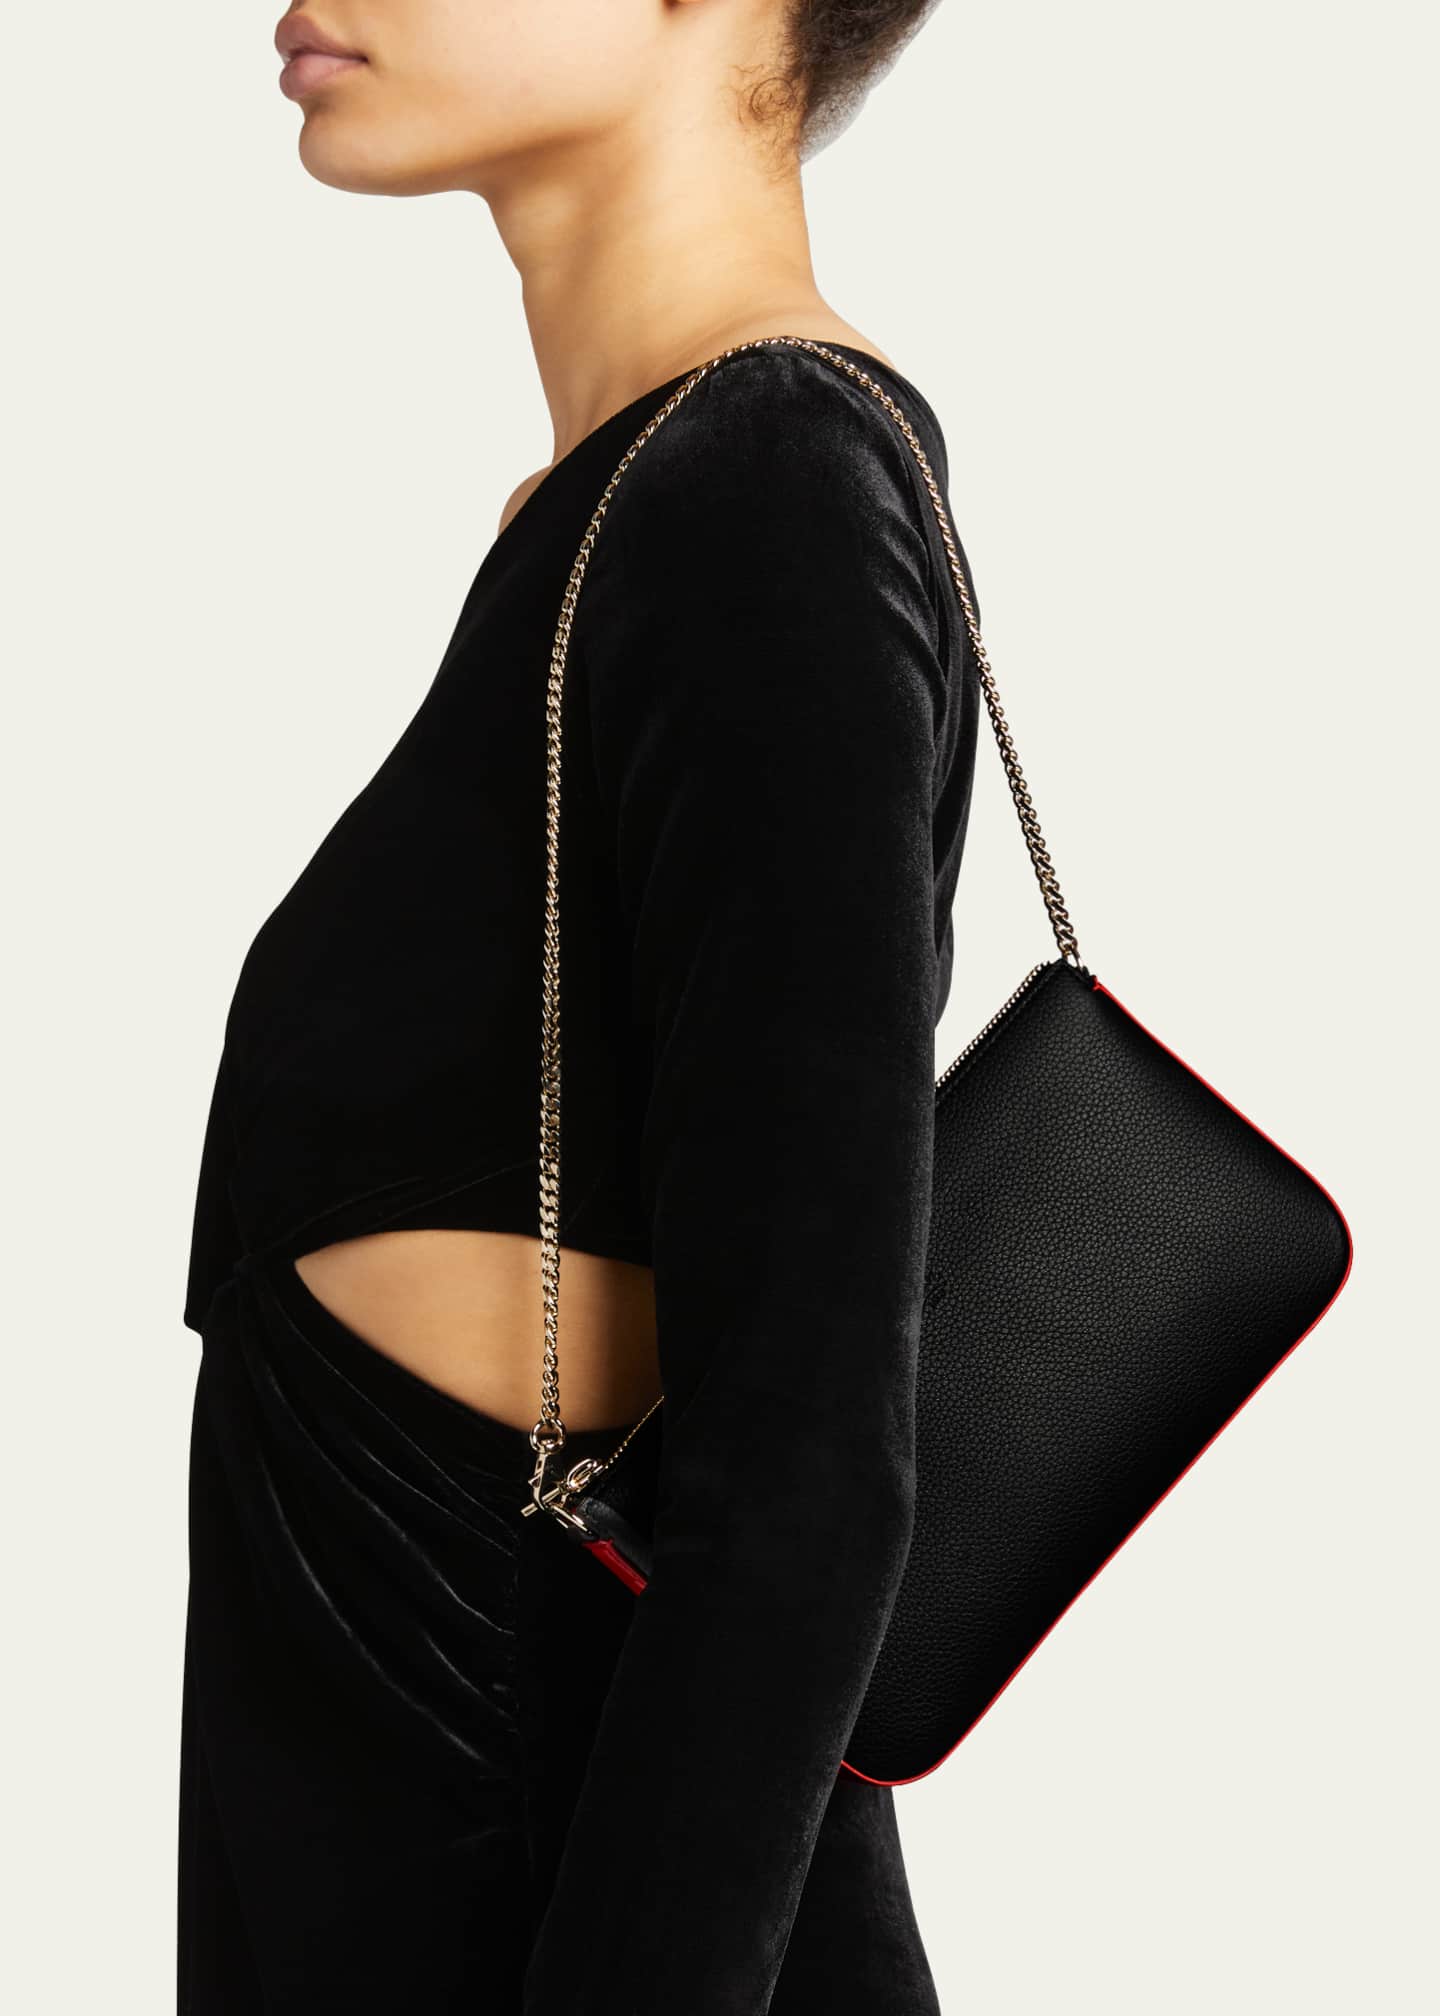 Experience with Christian Louboutin bags? : r/handbags